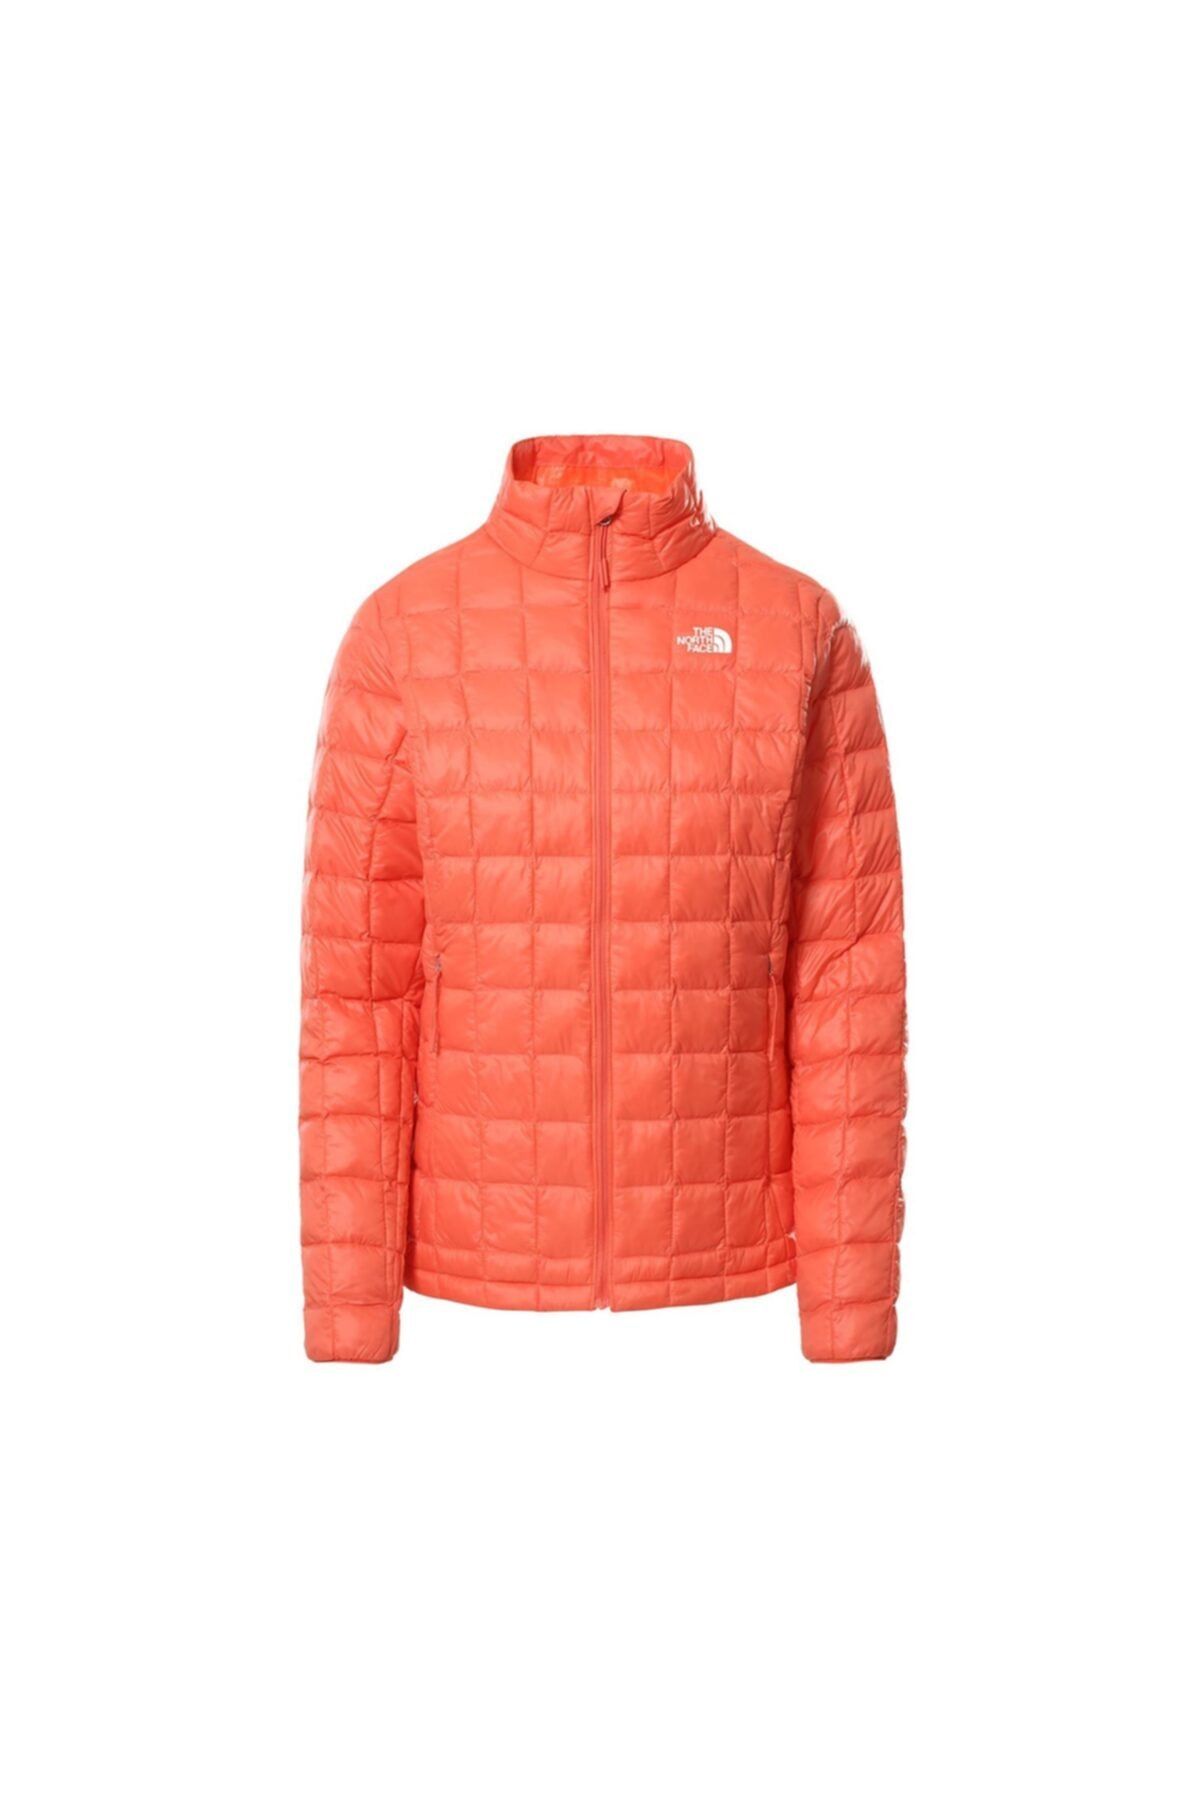 The North Face W Thermoball Eco Jacket 2.0 Kadın Outdoor Montu Nf0a5gld3by1 Pembe